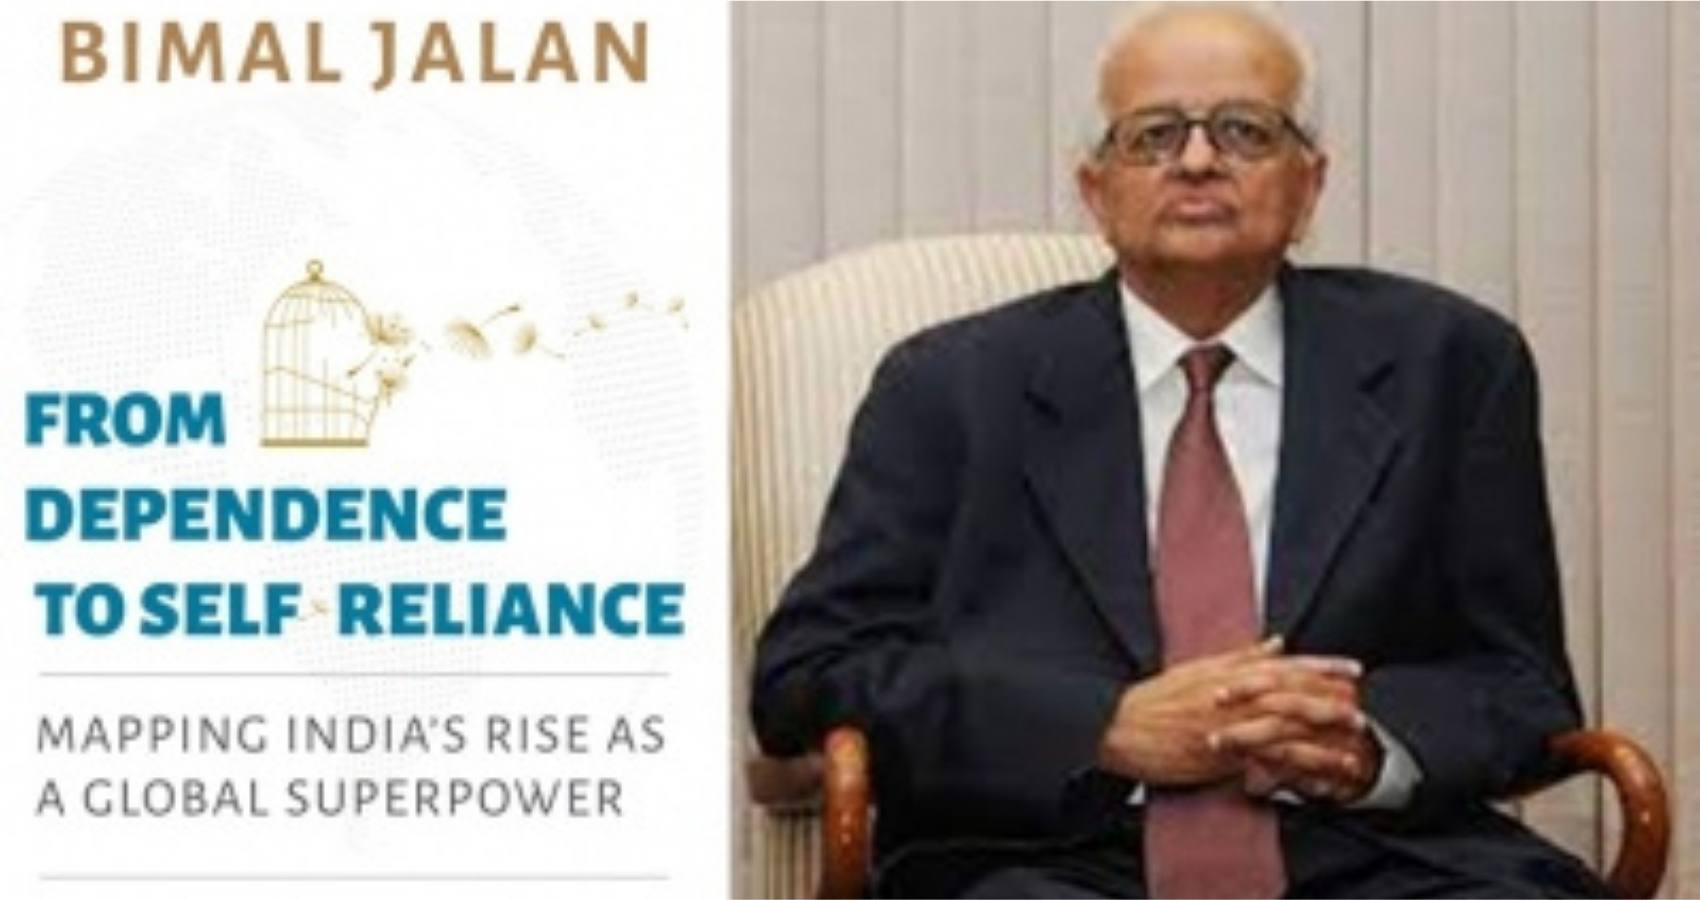 India Uniquely Placed To Take Advantage Of Phenomenal Changes In Tech, Trade, Skilled Manpower: Bimal Jalan